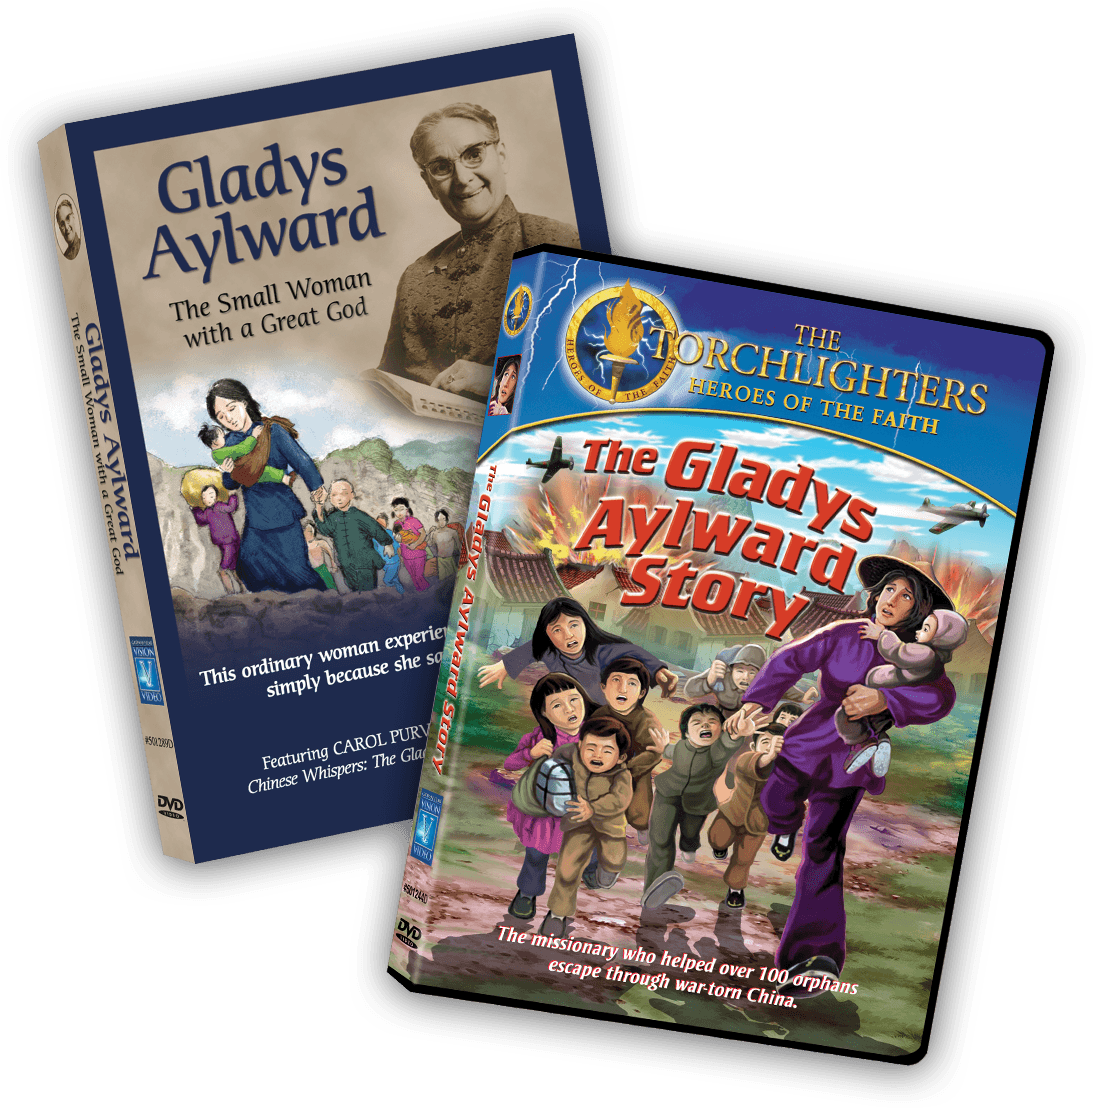 Two DVDs: The Gladys Aylward Story and Gladys Aylward: The Small Woman with a Great God